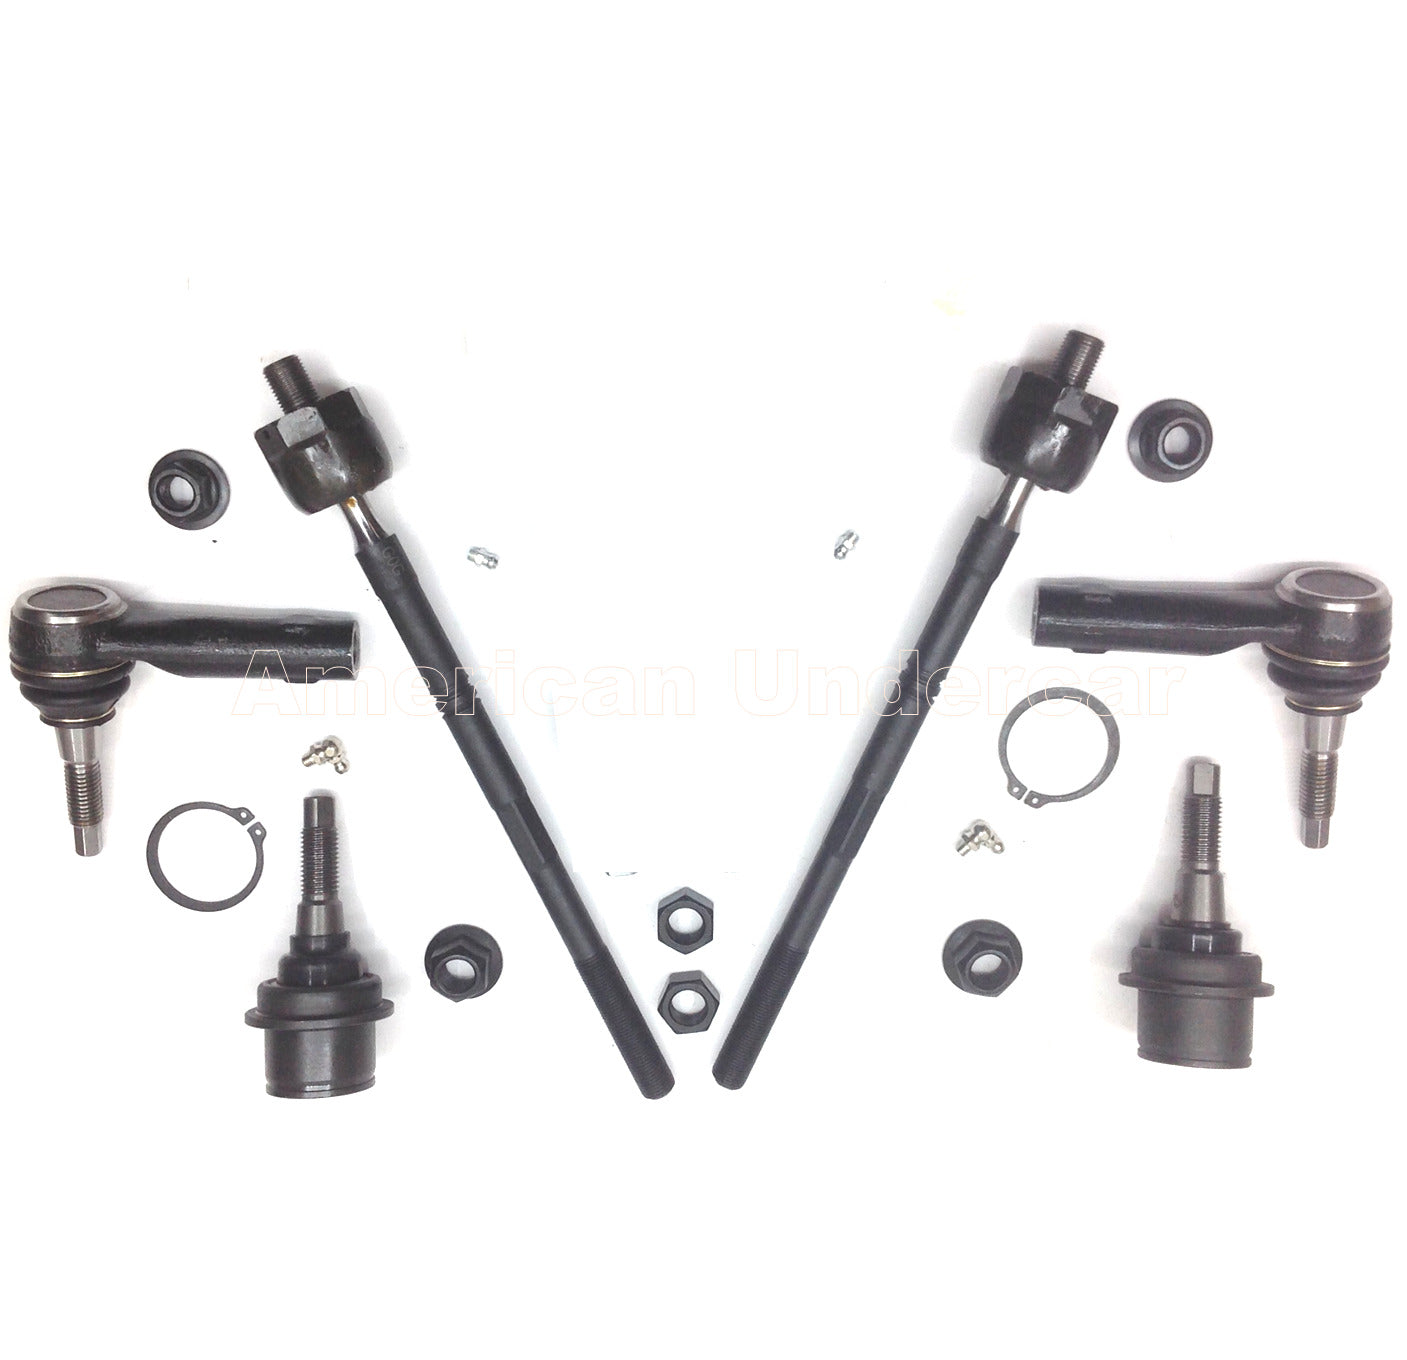 XRF Lower Ball Joints Tie Rod Ends Steering Kit for 2004-2008 Ford F150 2WD